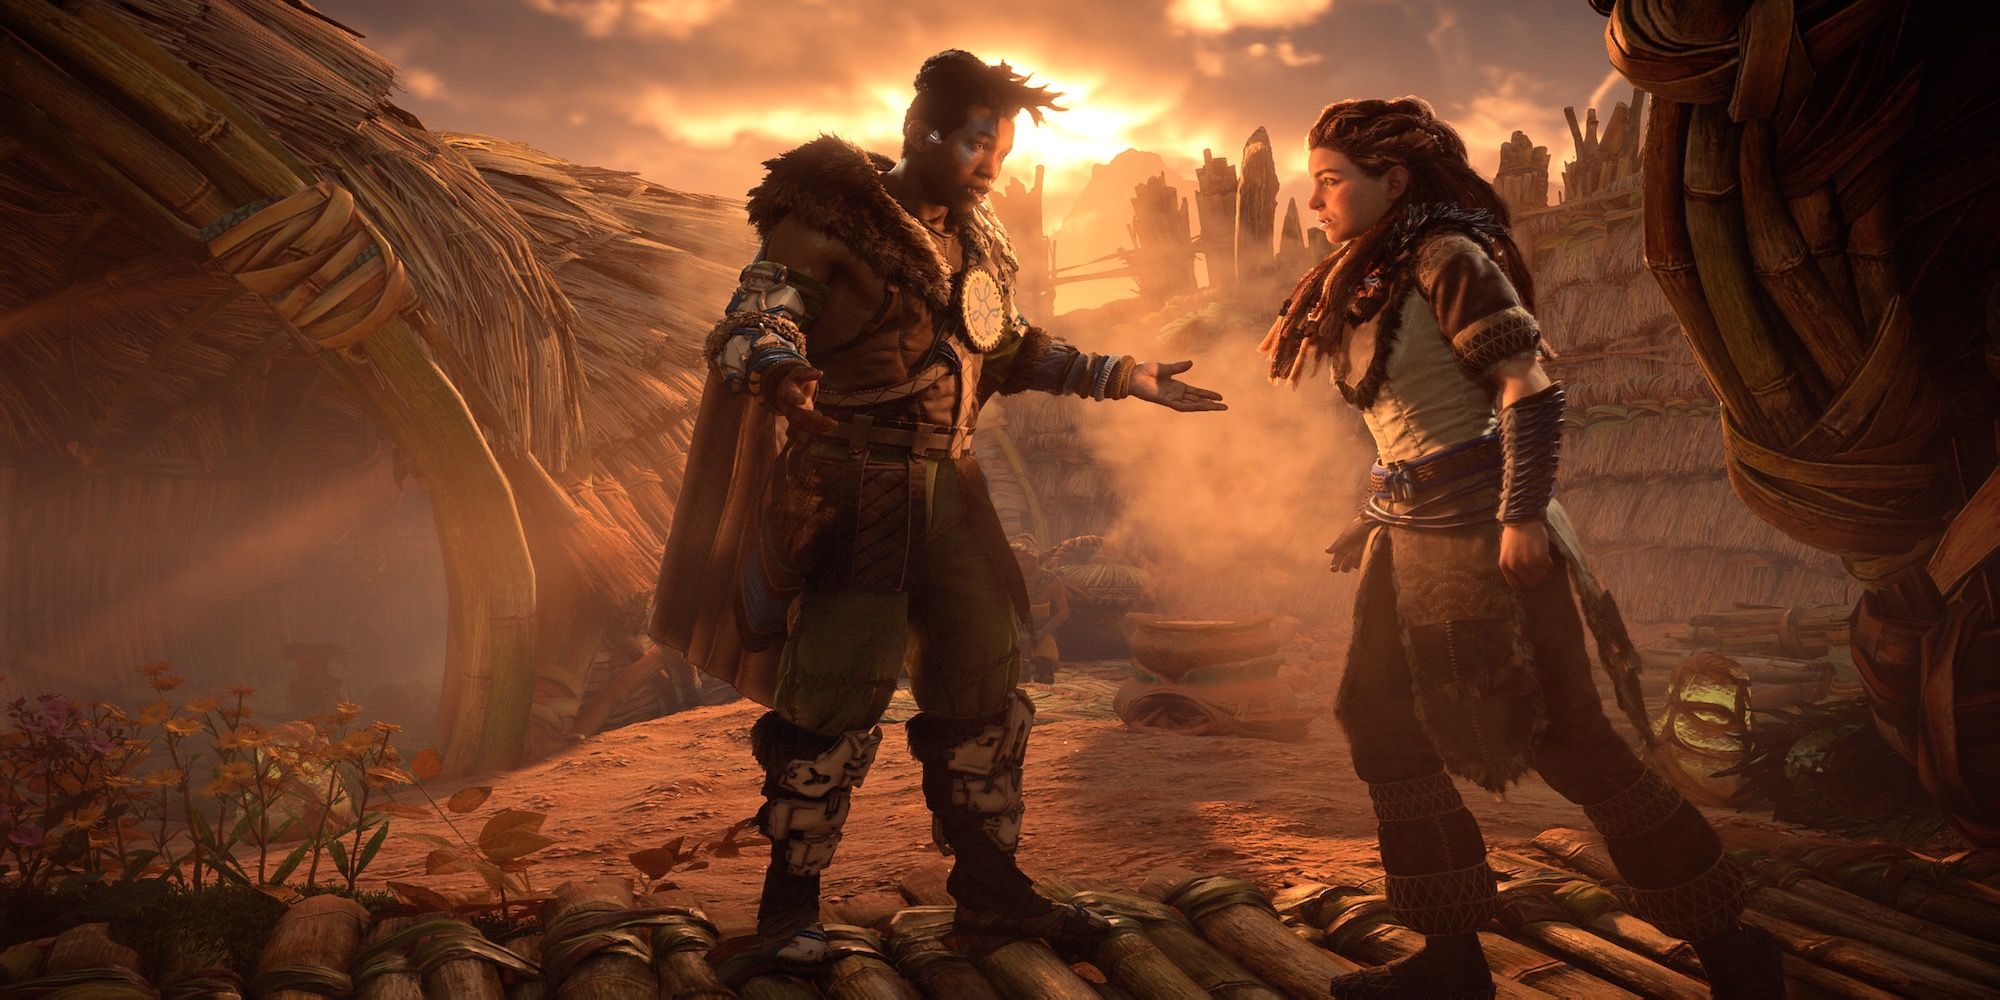 Varl and Aloy from Horizon Forbidden West